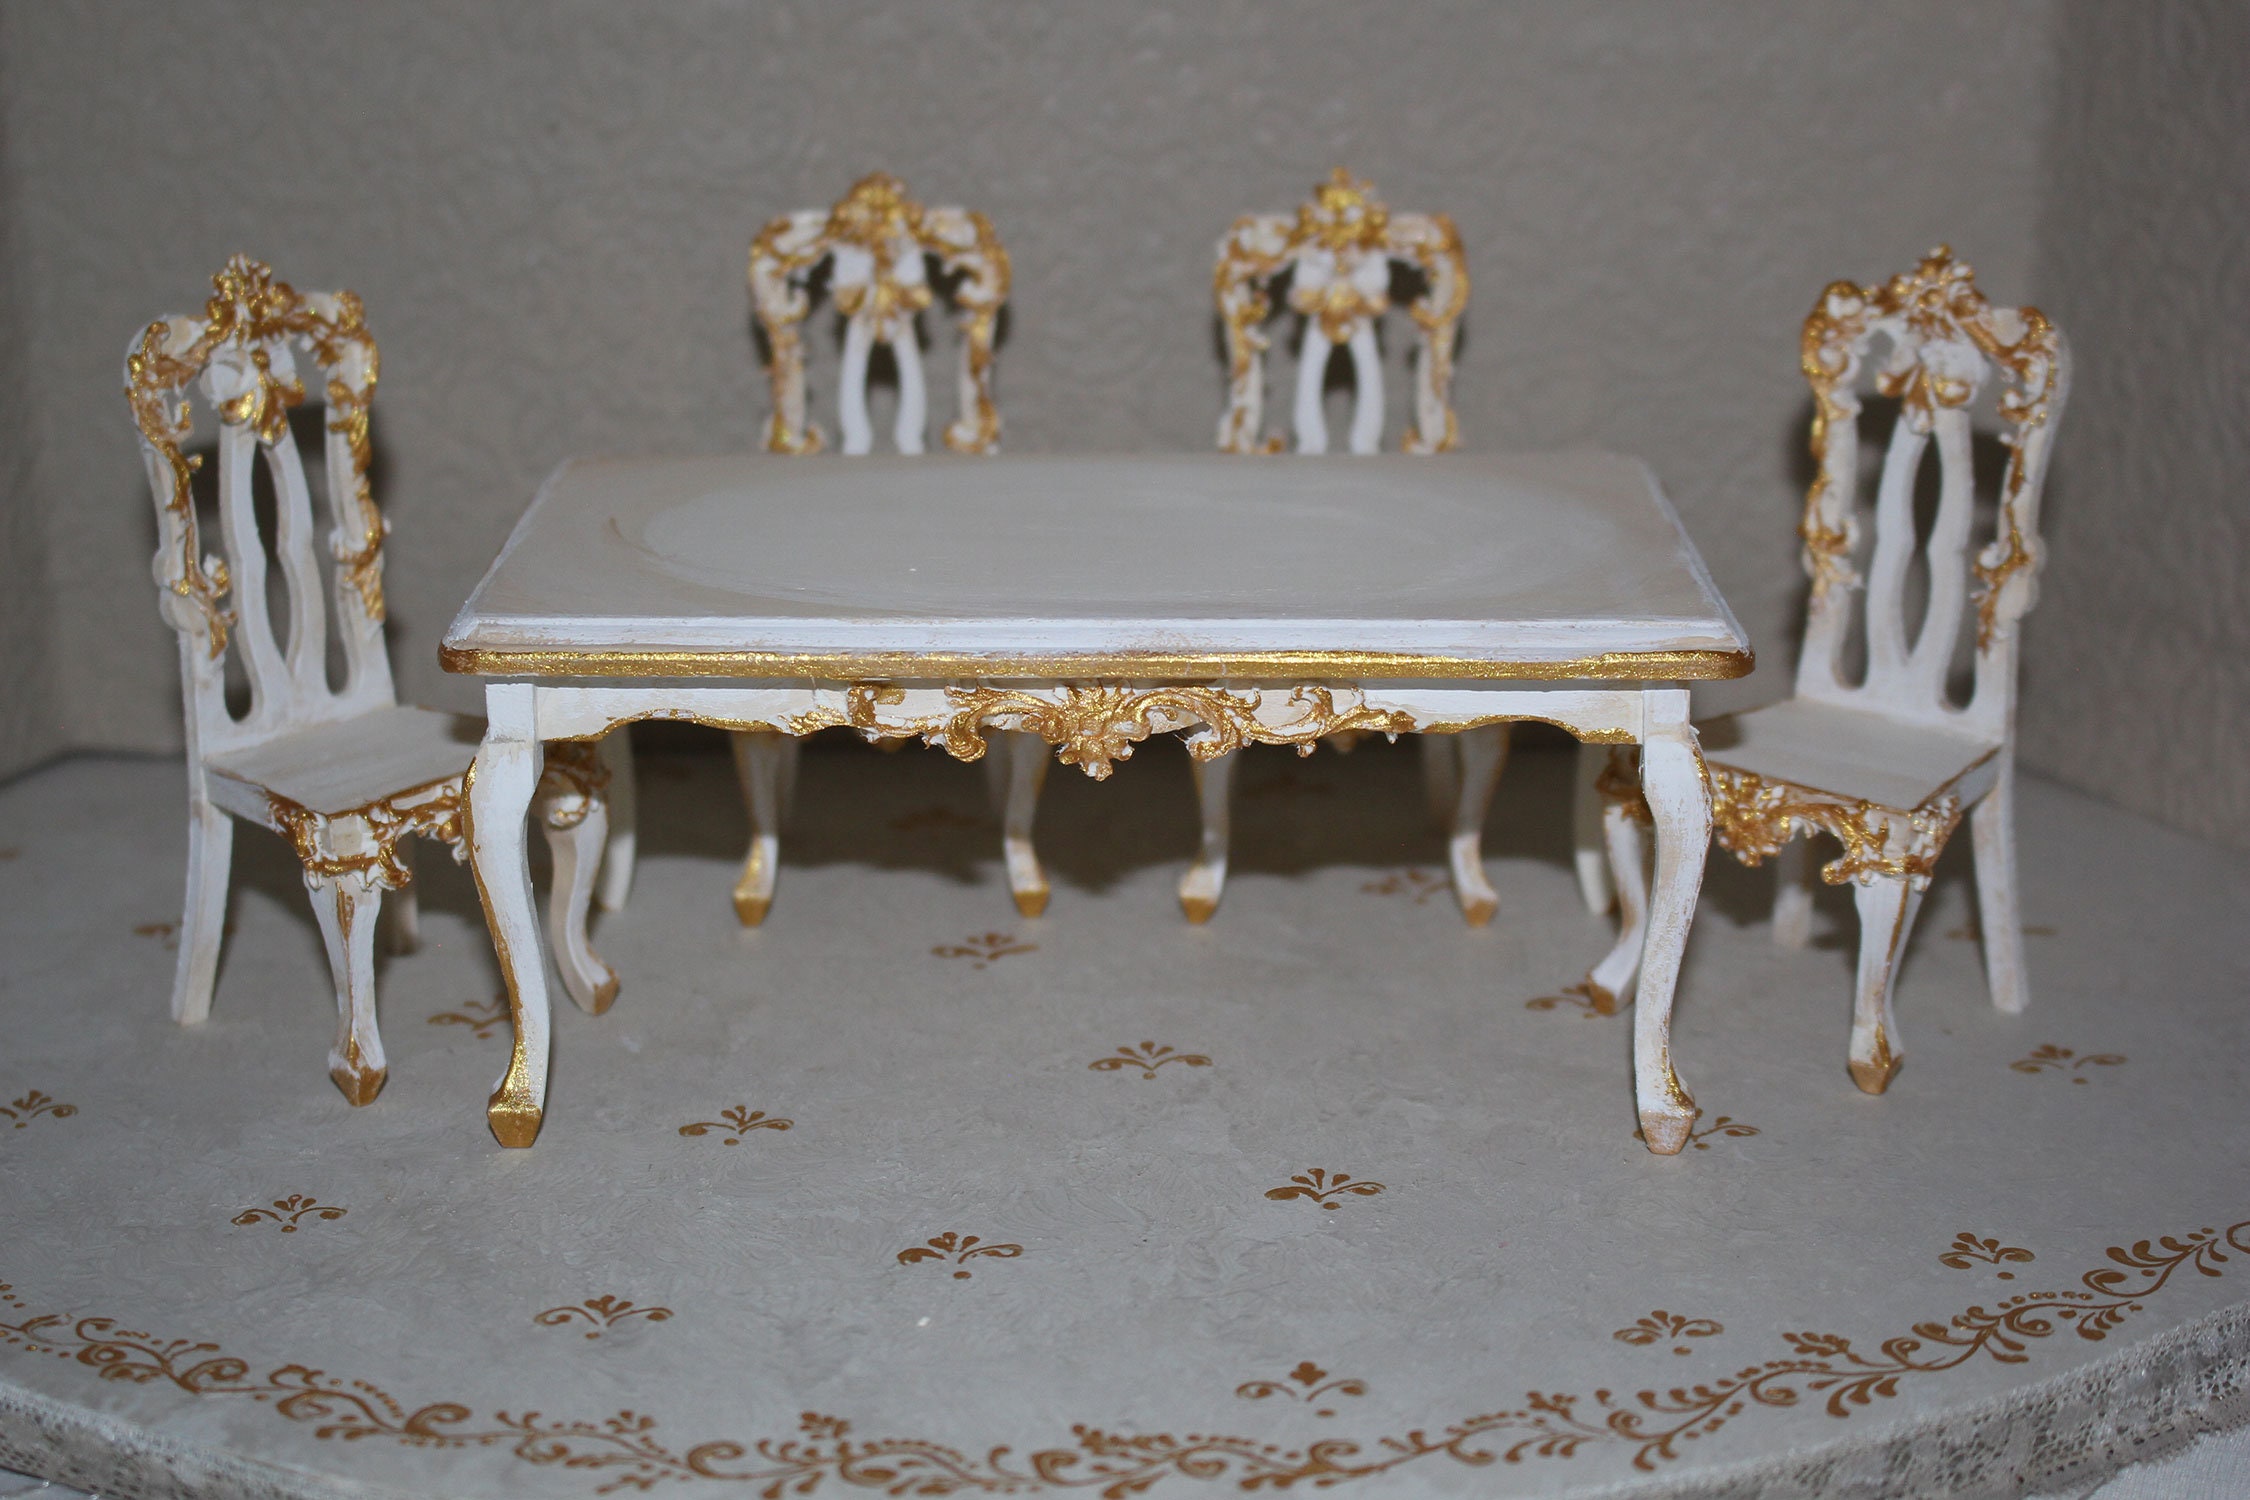 Louis XV Antique French Rococo Dining table 3D model - Download